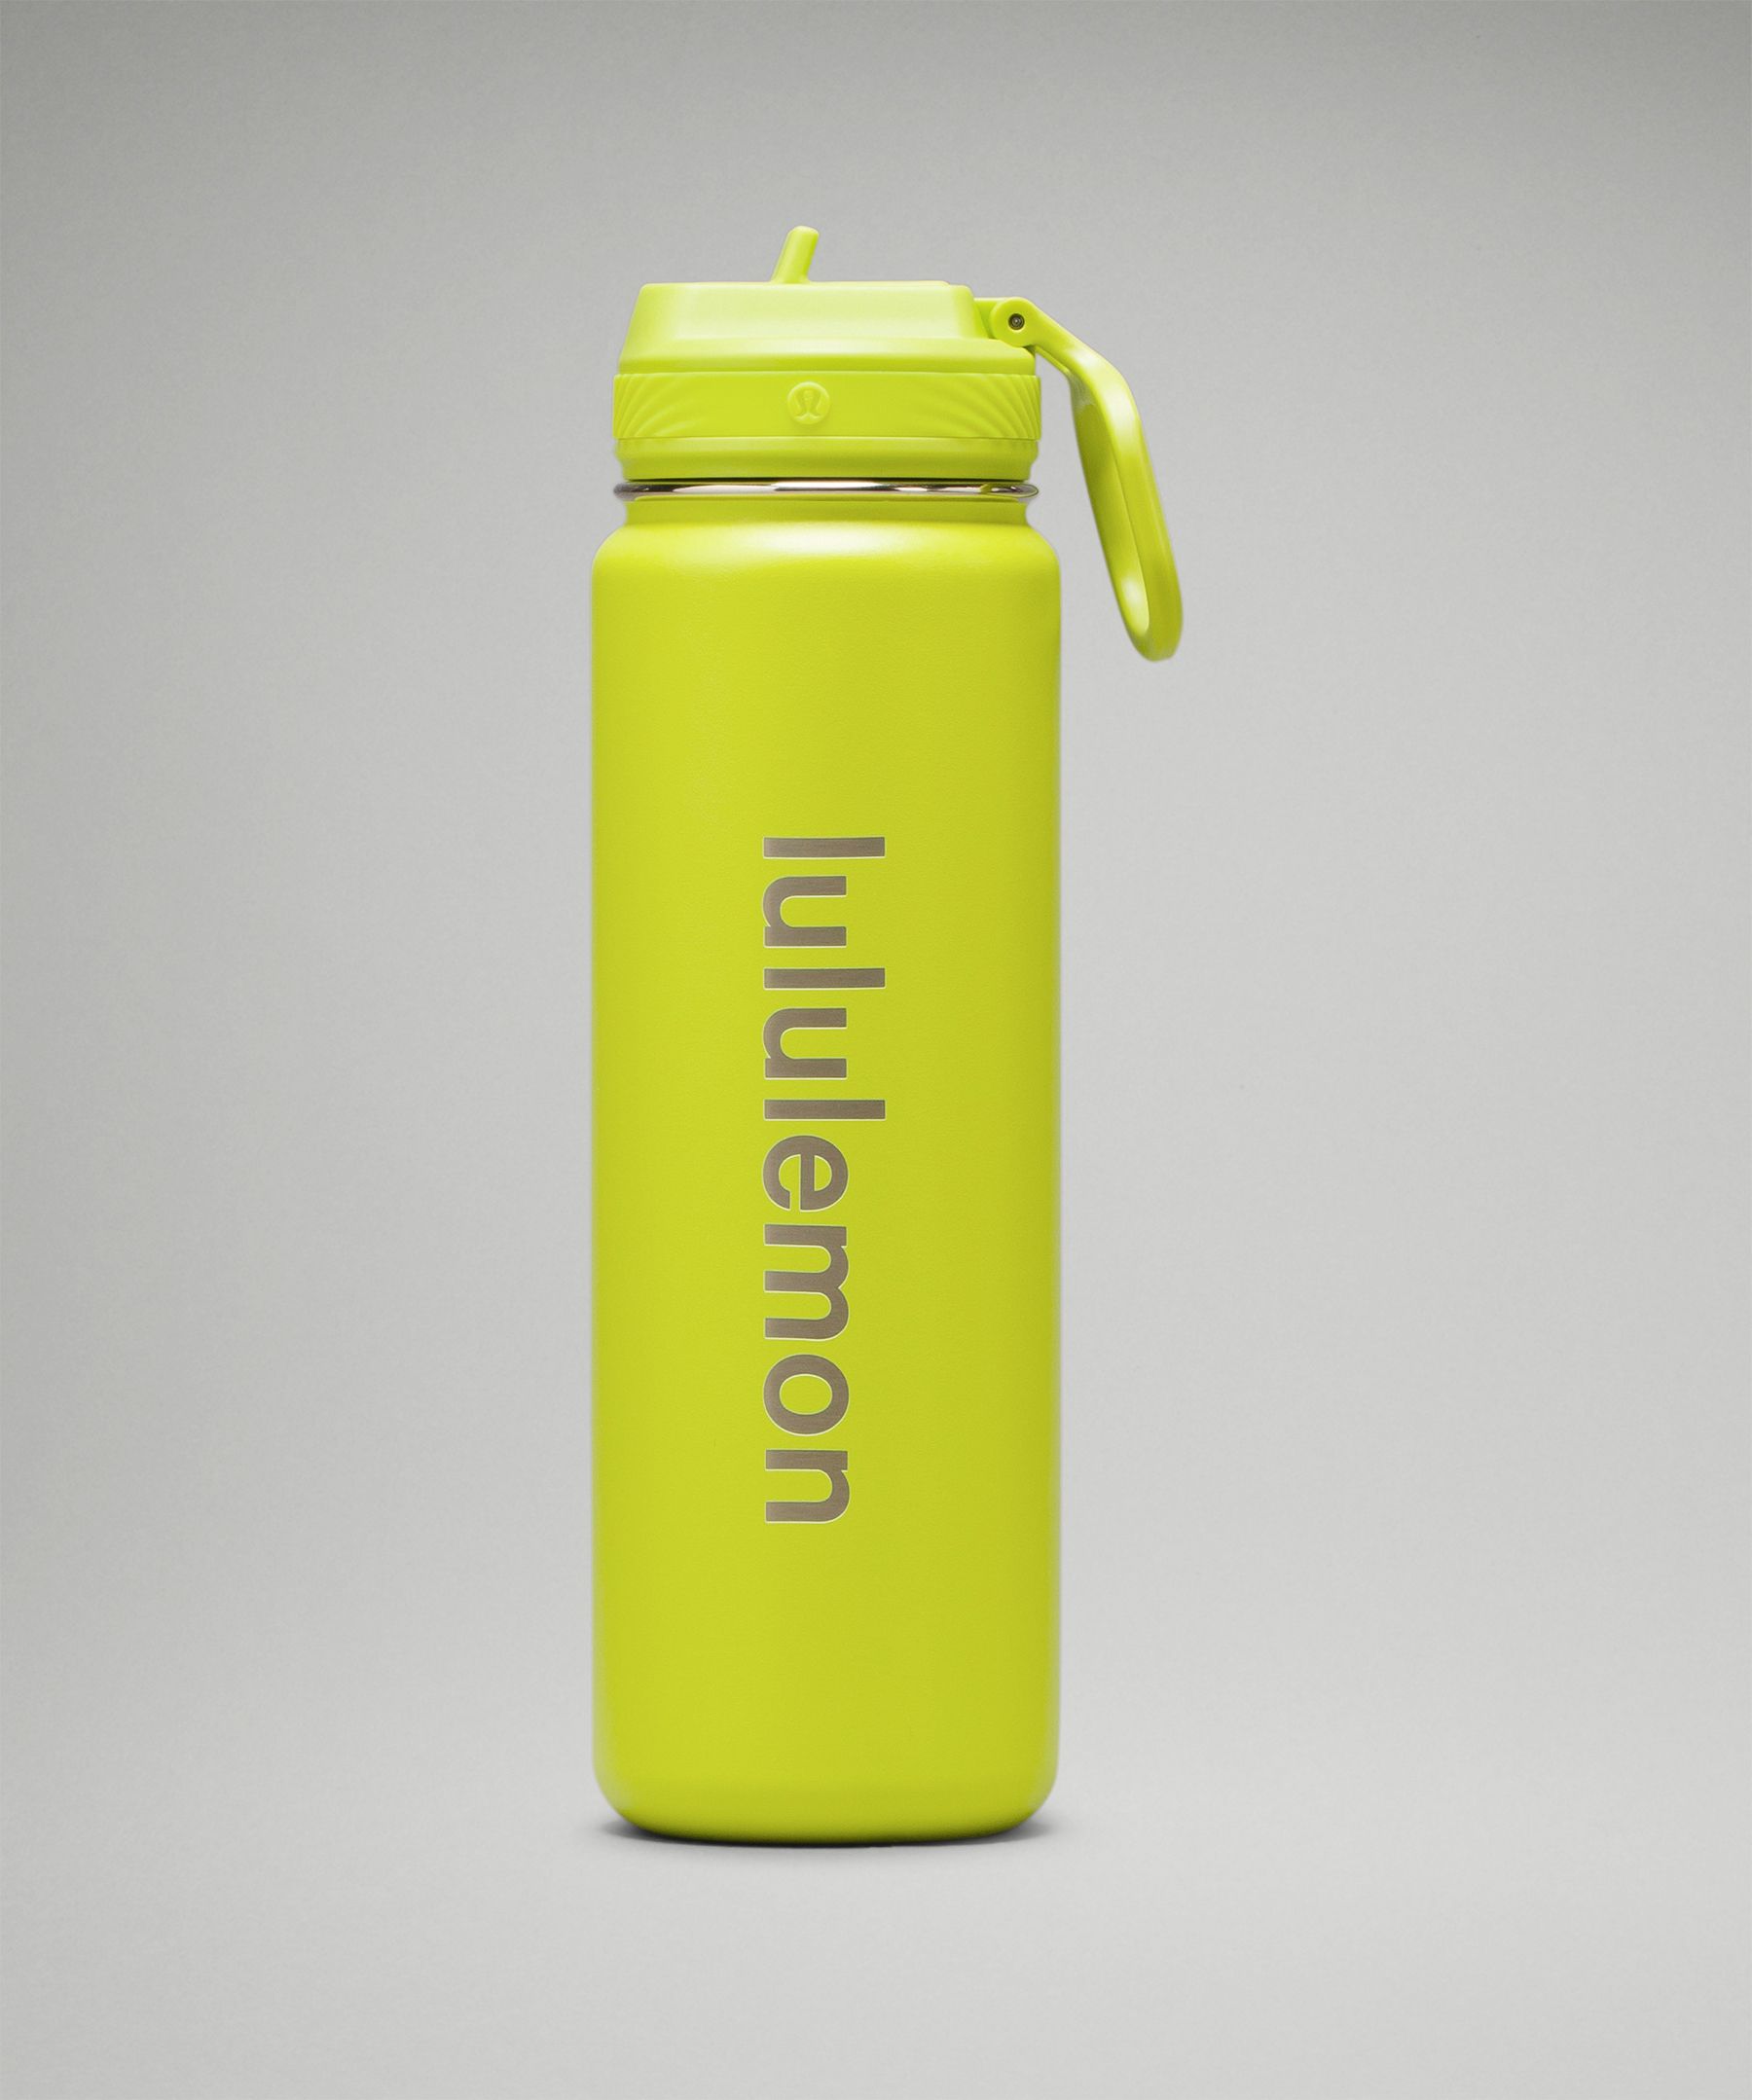 Lululemon Water Bottles Retail - Green Twill Accessories Back to